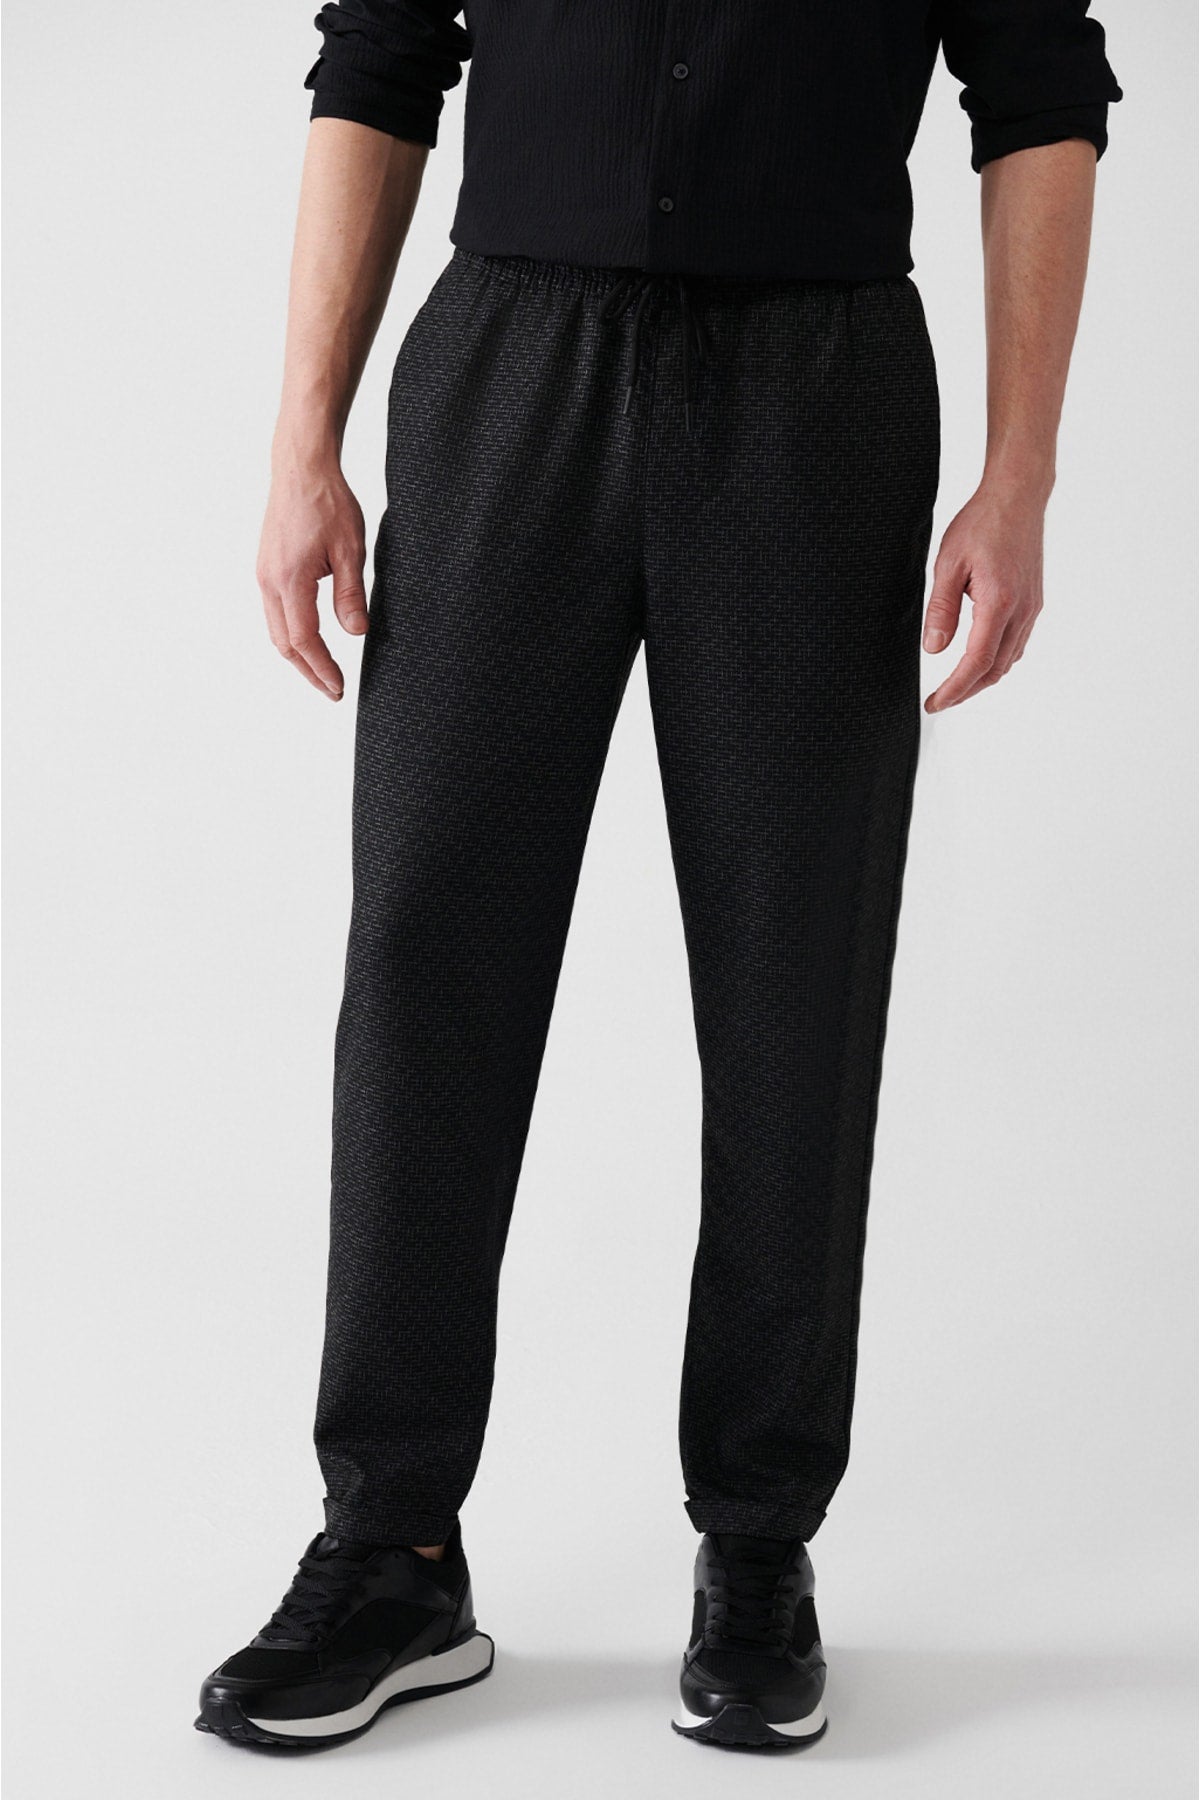 Men's Black Patterned Lycra Relaxed Fit Jogger Pants A31y3008